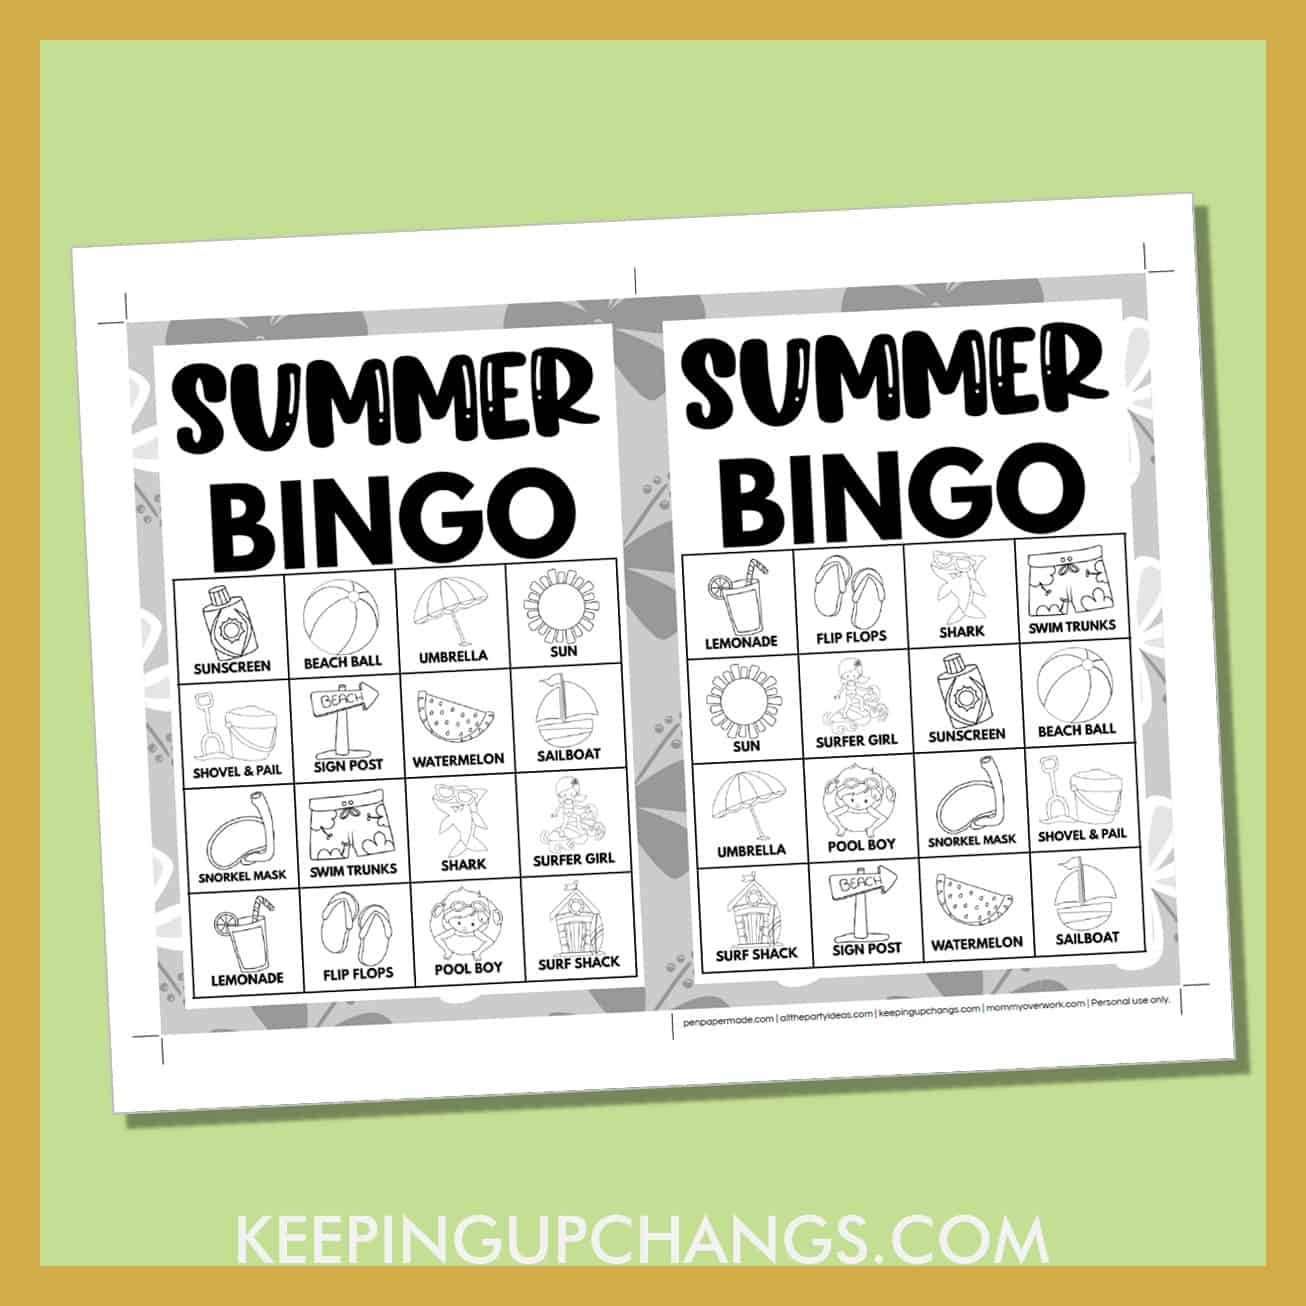 free summer beach bingo card 4x4 5x7 game boards with black white images and text words.